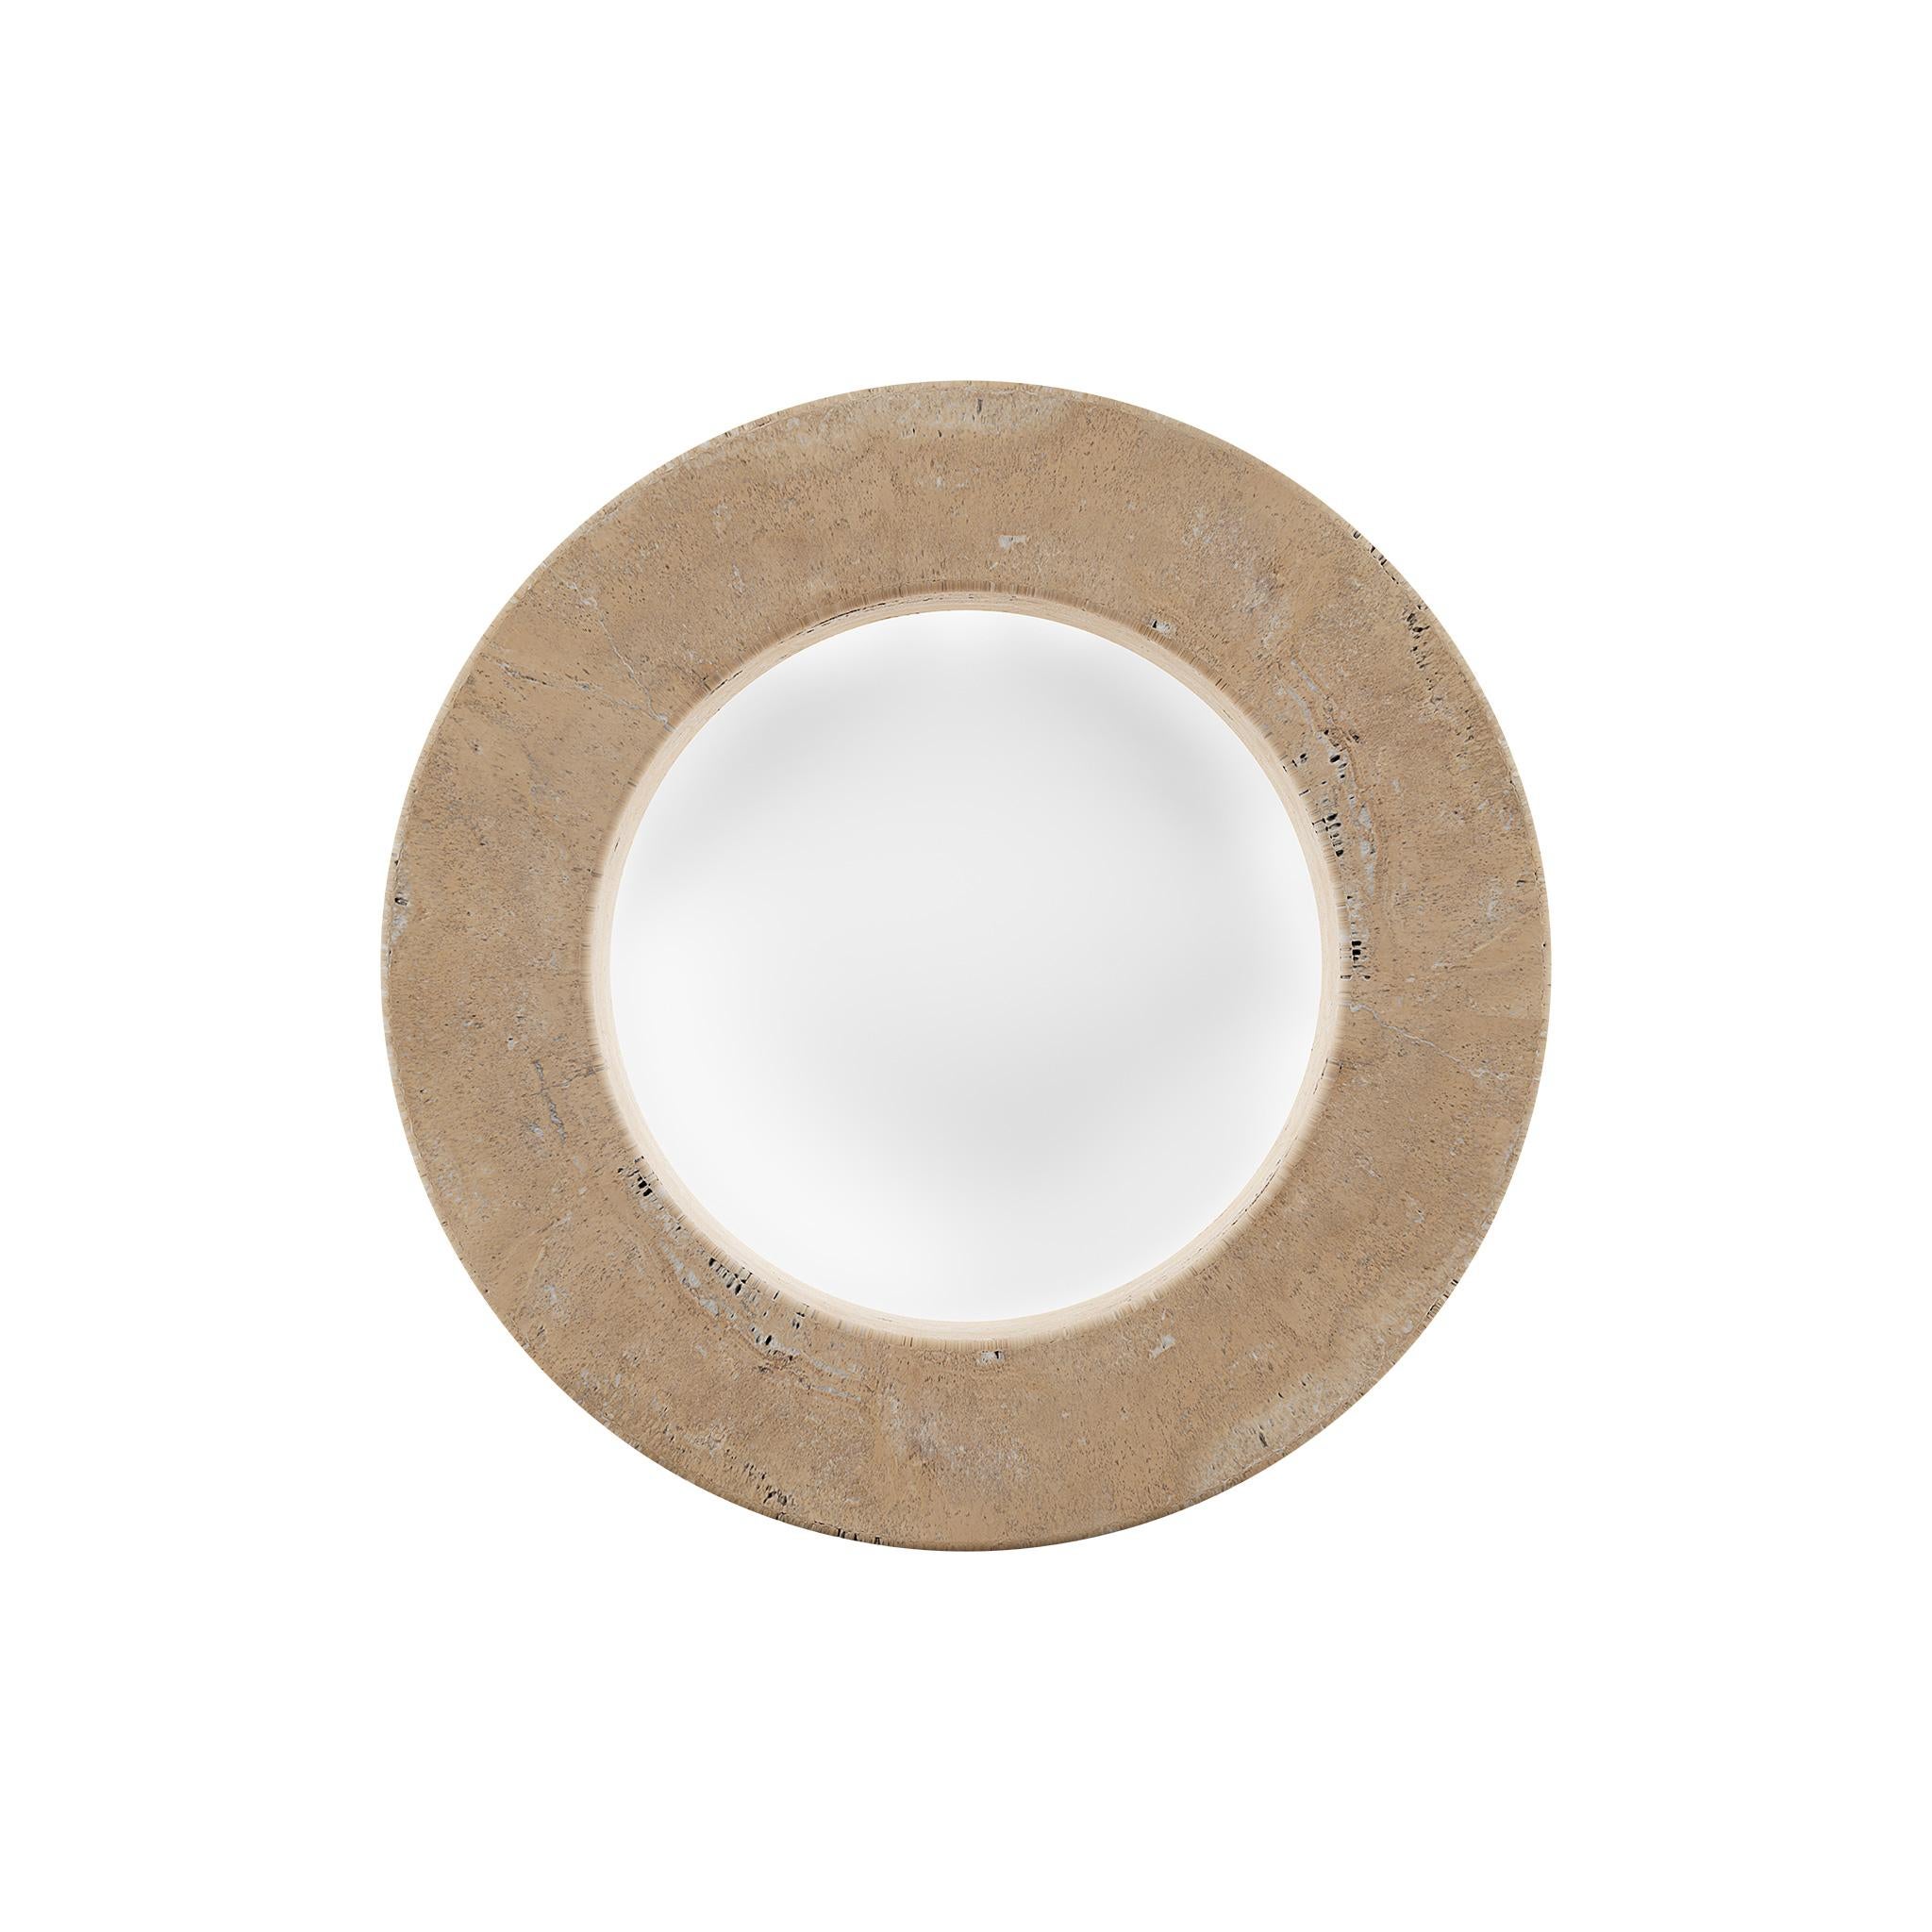 Contemporary Wall Lamp in Travertine
Illuminate your space with contemporary elegance with our Wall Lamp in Travertine. This sophisticated fixture not only provides soft and cozy lighting but also adds a touch of modern luxury to your home